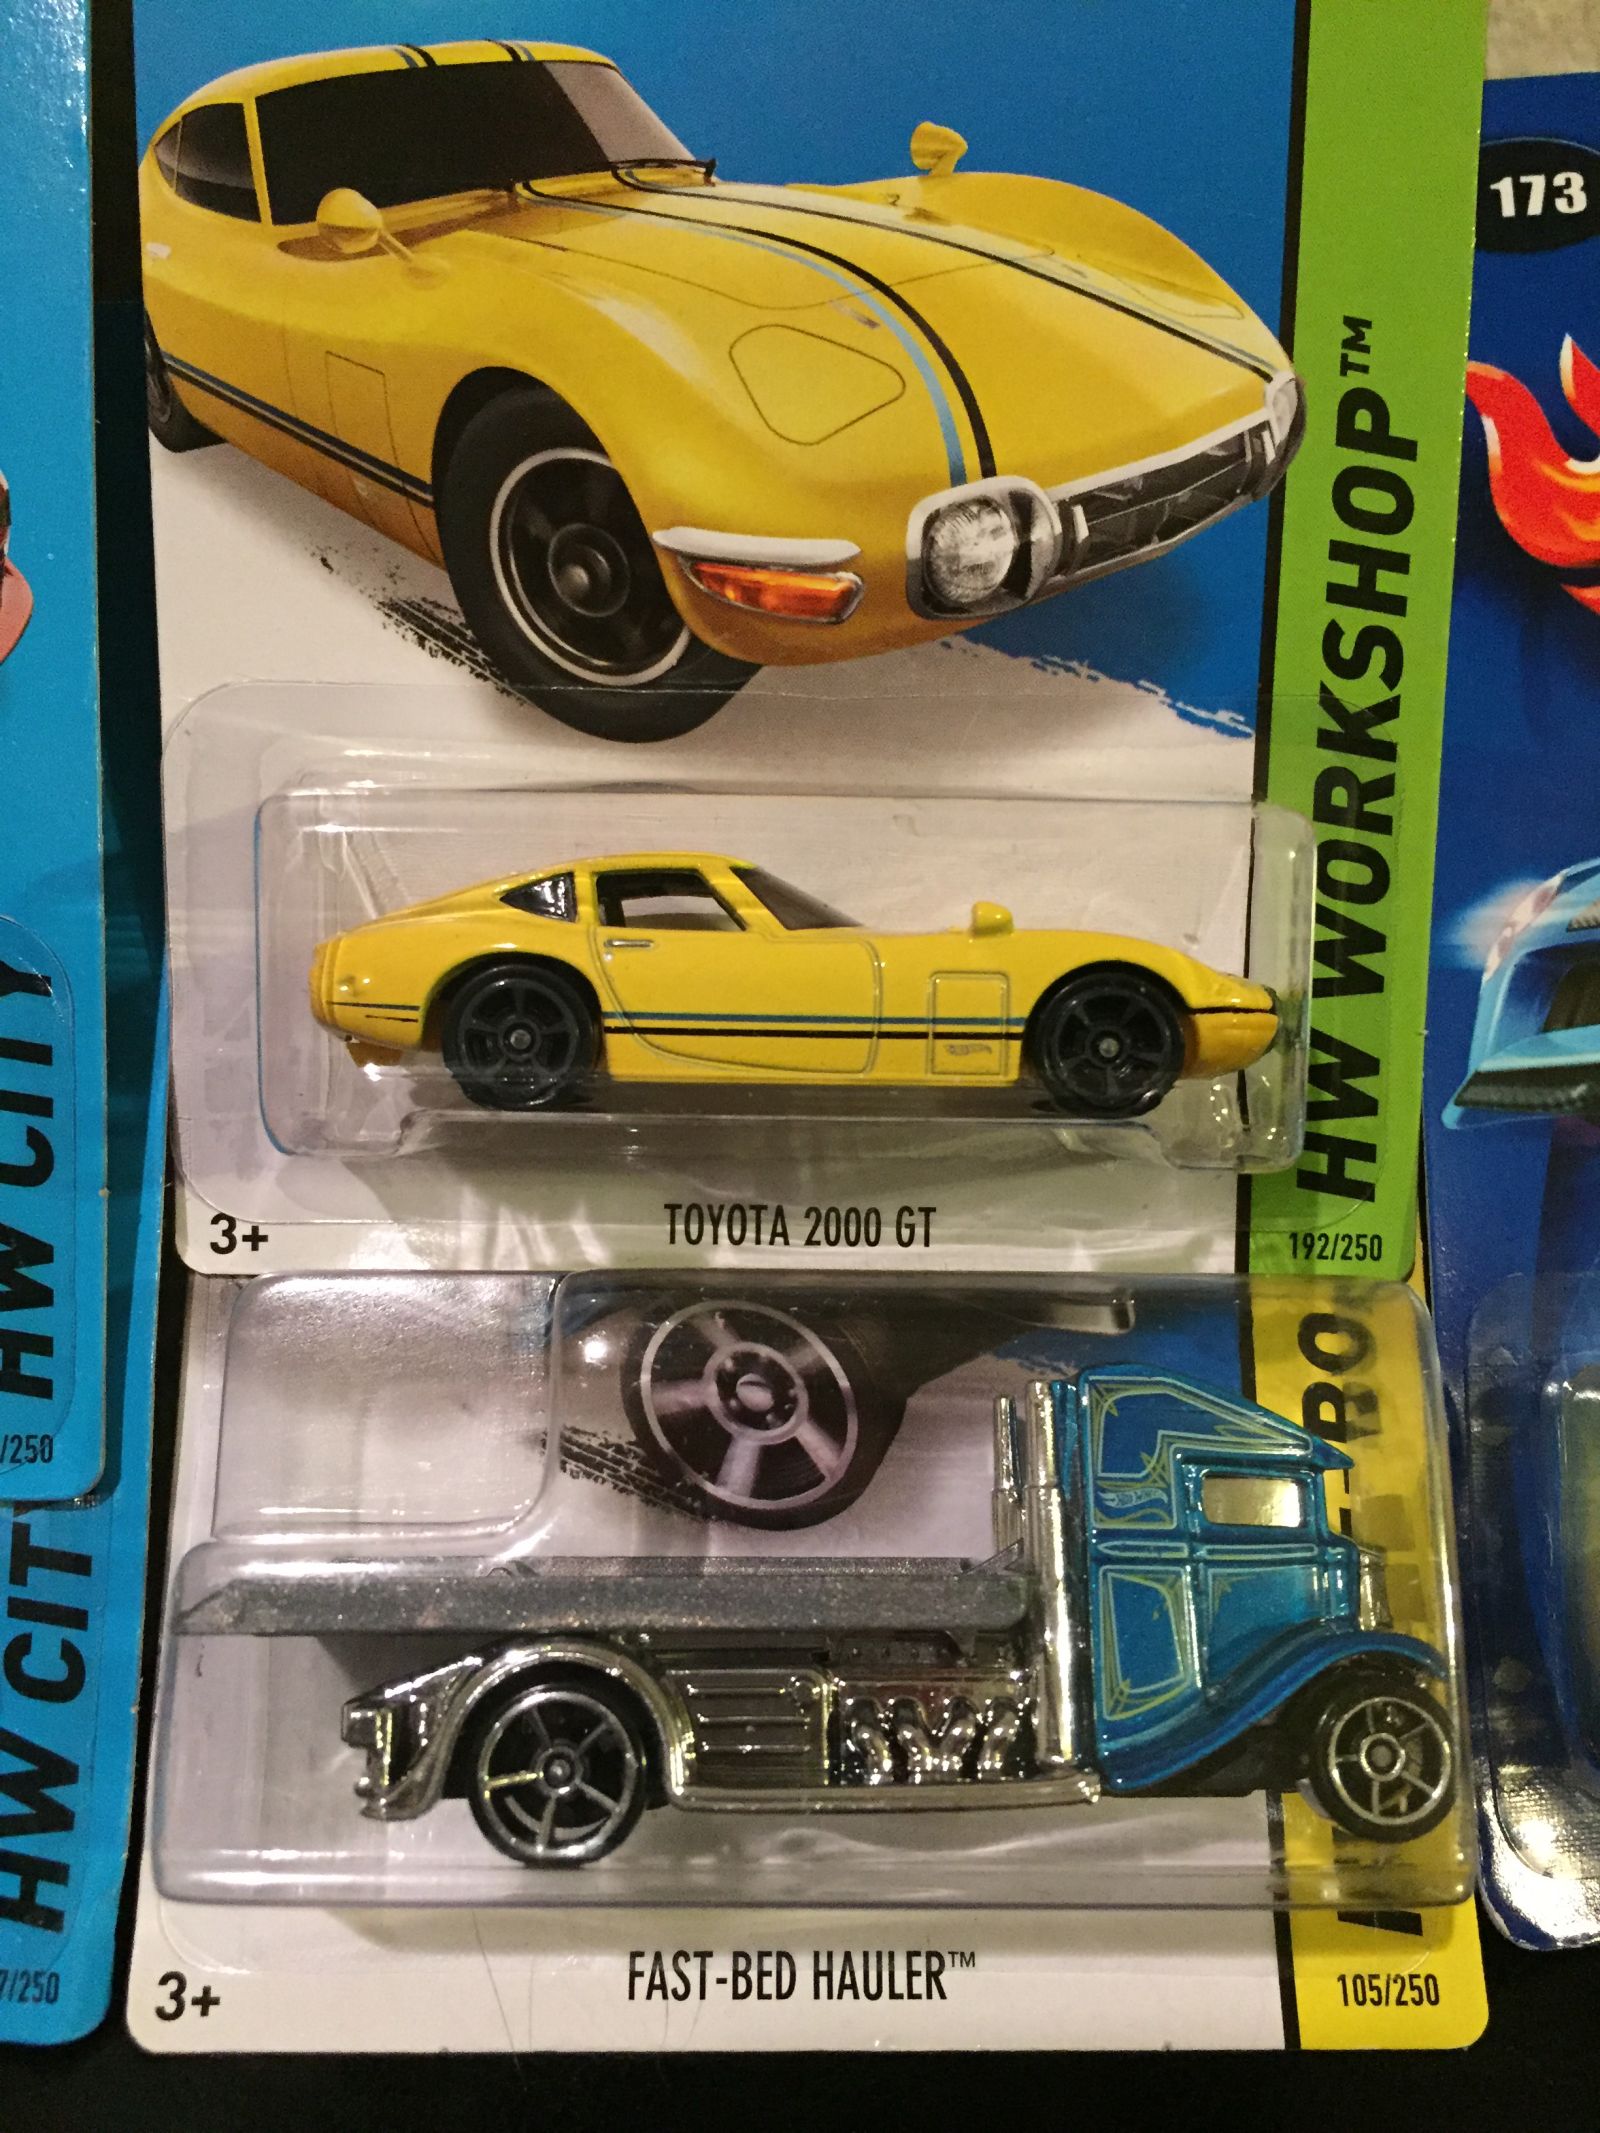 I couldn’t pass up this 2000 GT and I wish I wouldn’t grabbed a couple more of the haulers because they are sweet looking.